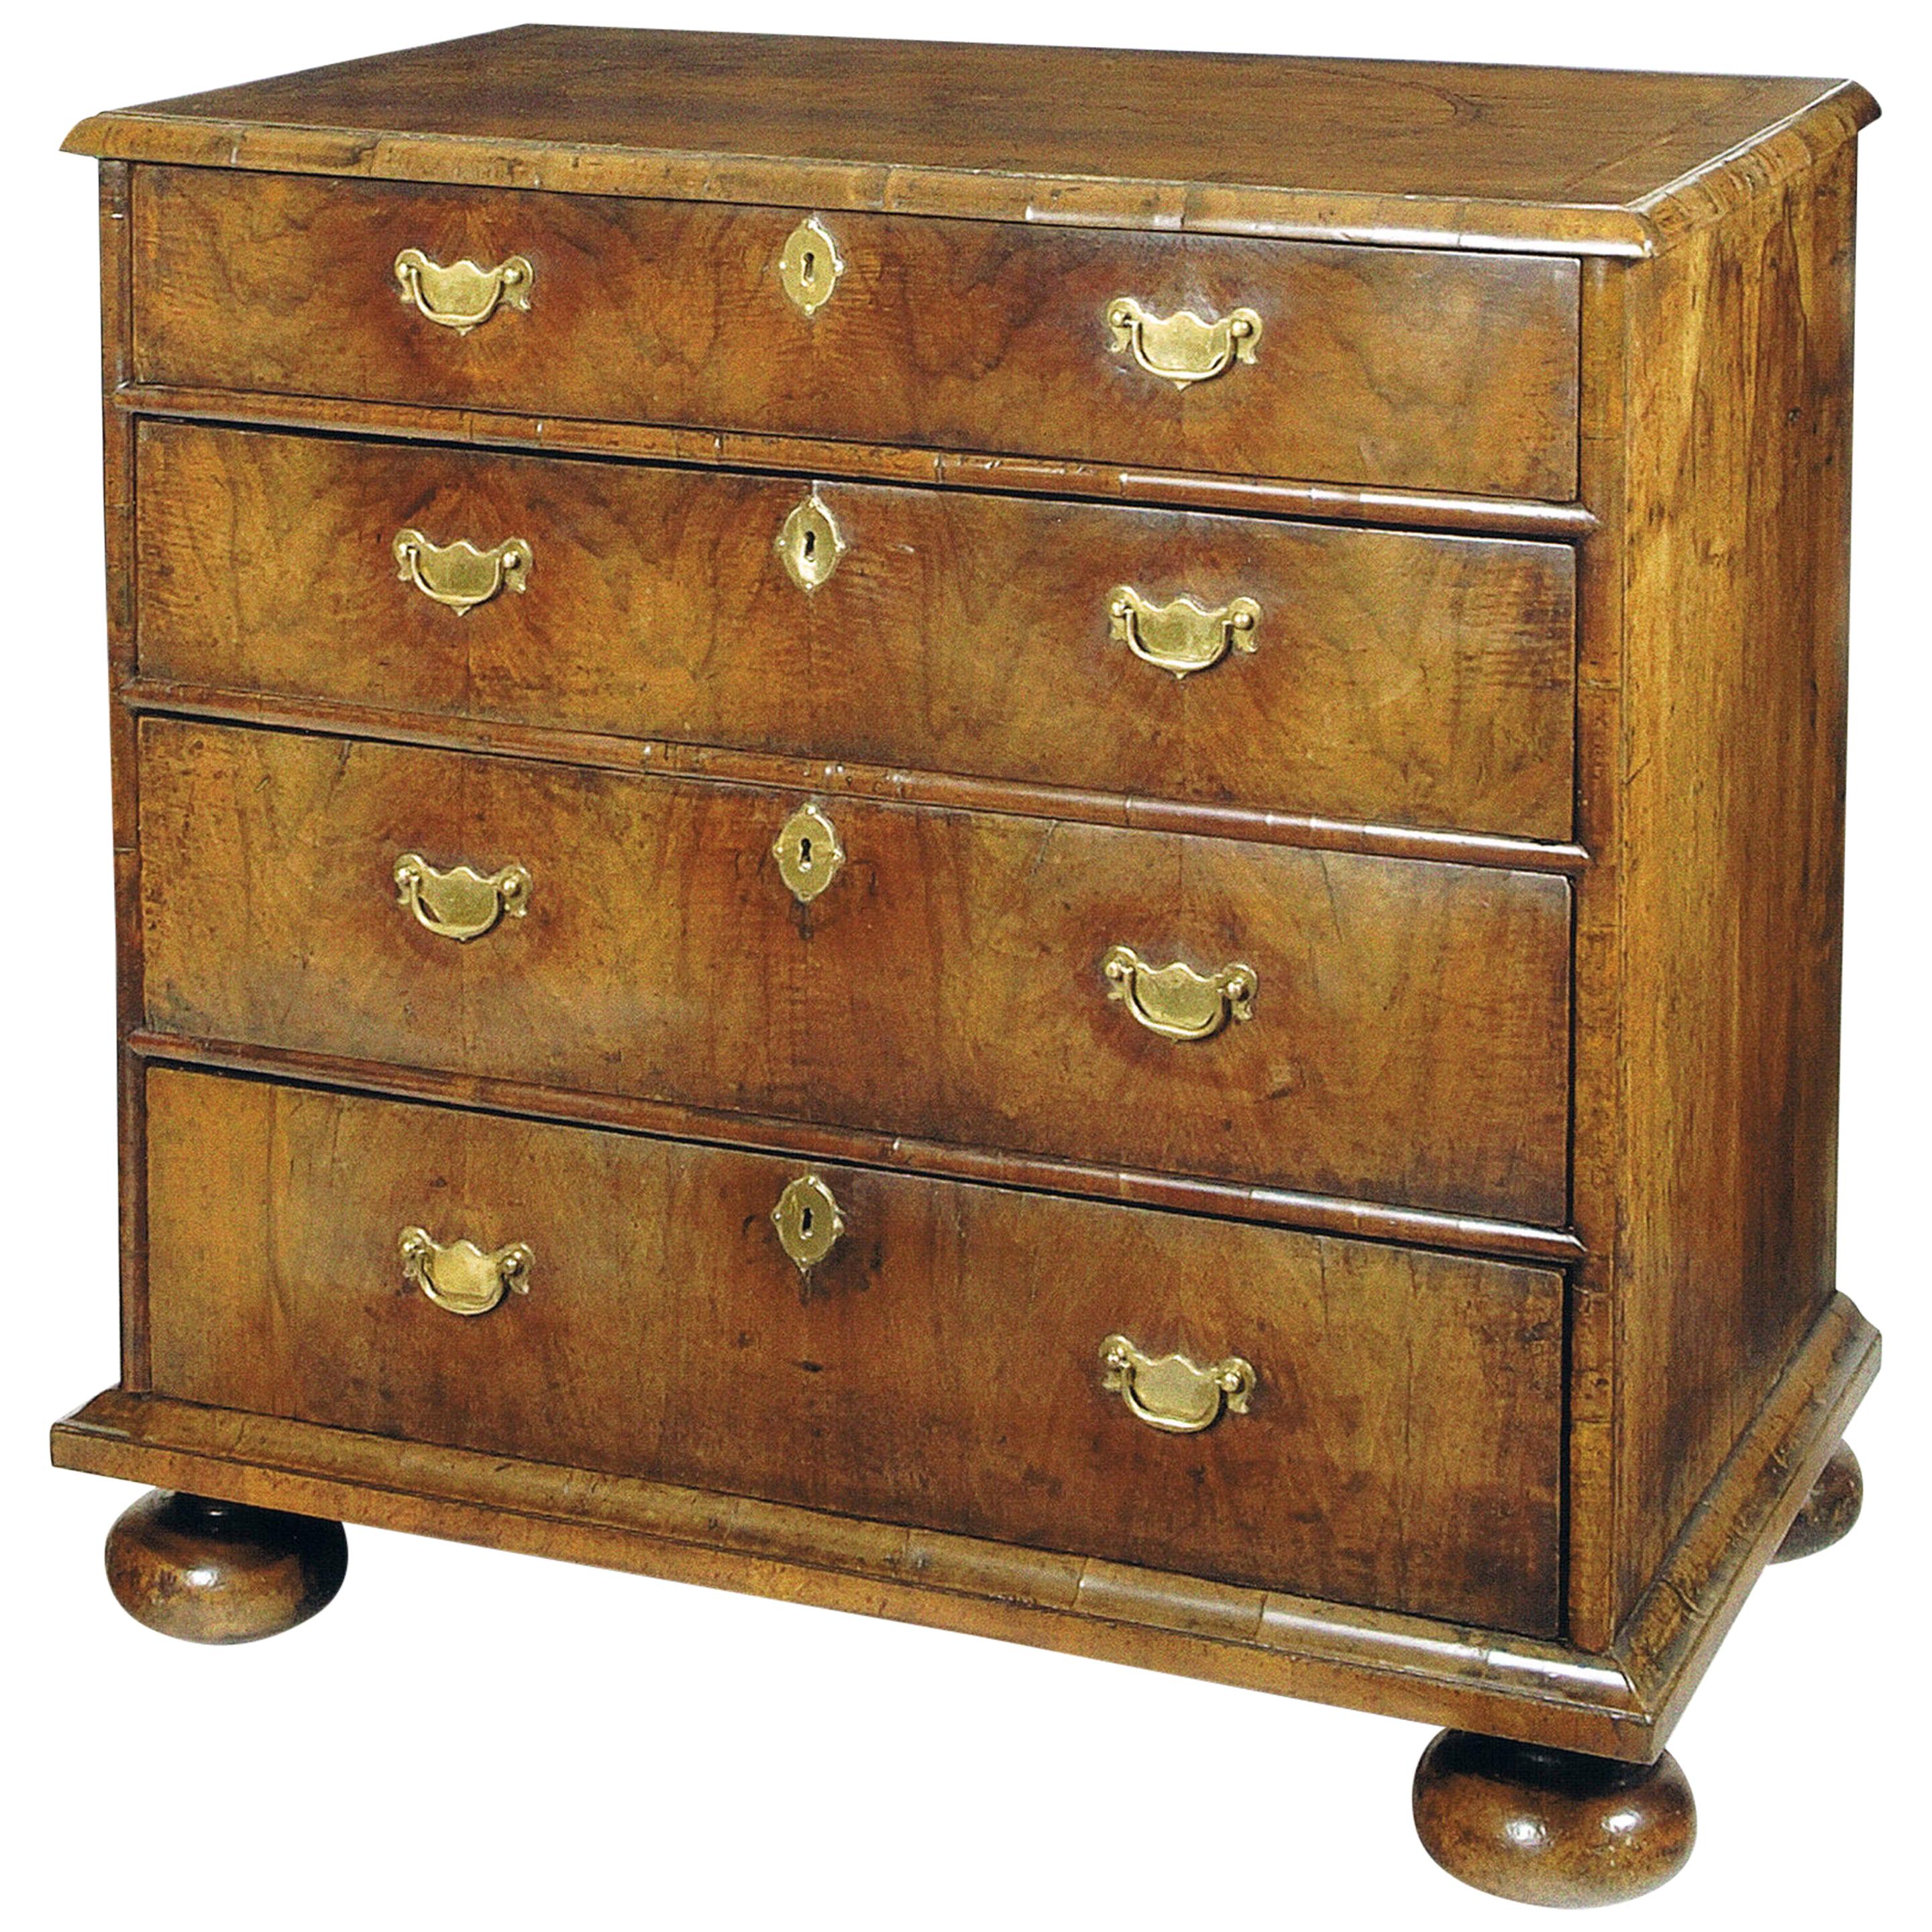 Early 18th Century Antique English Queen Anne Walnut Chest of Drawers For Sale